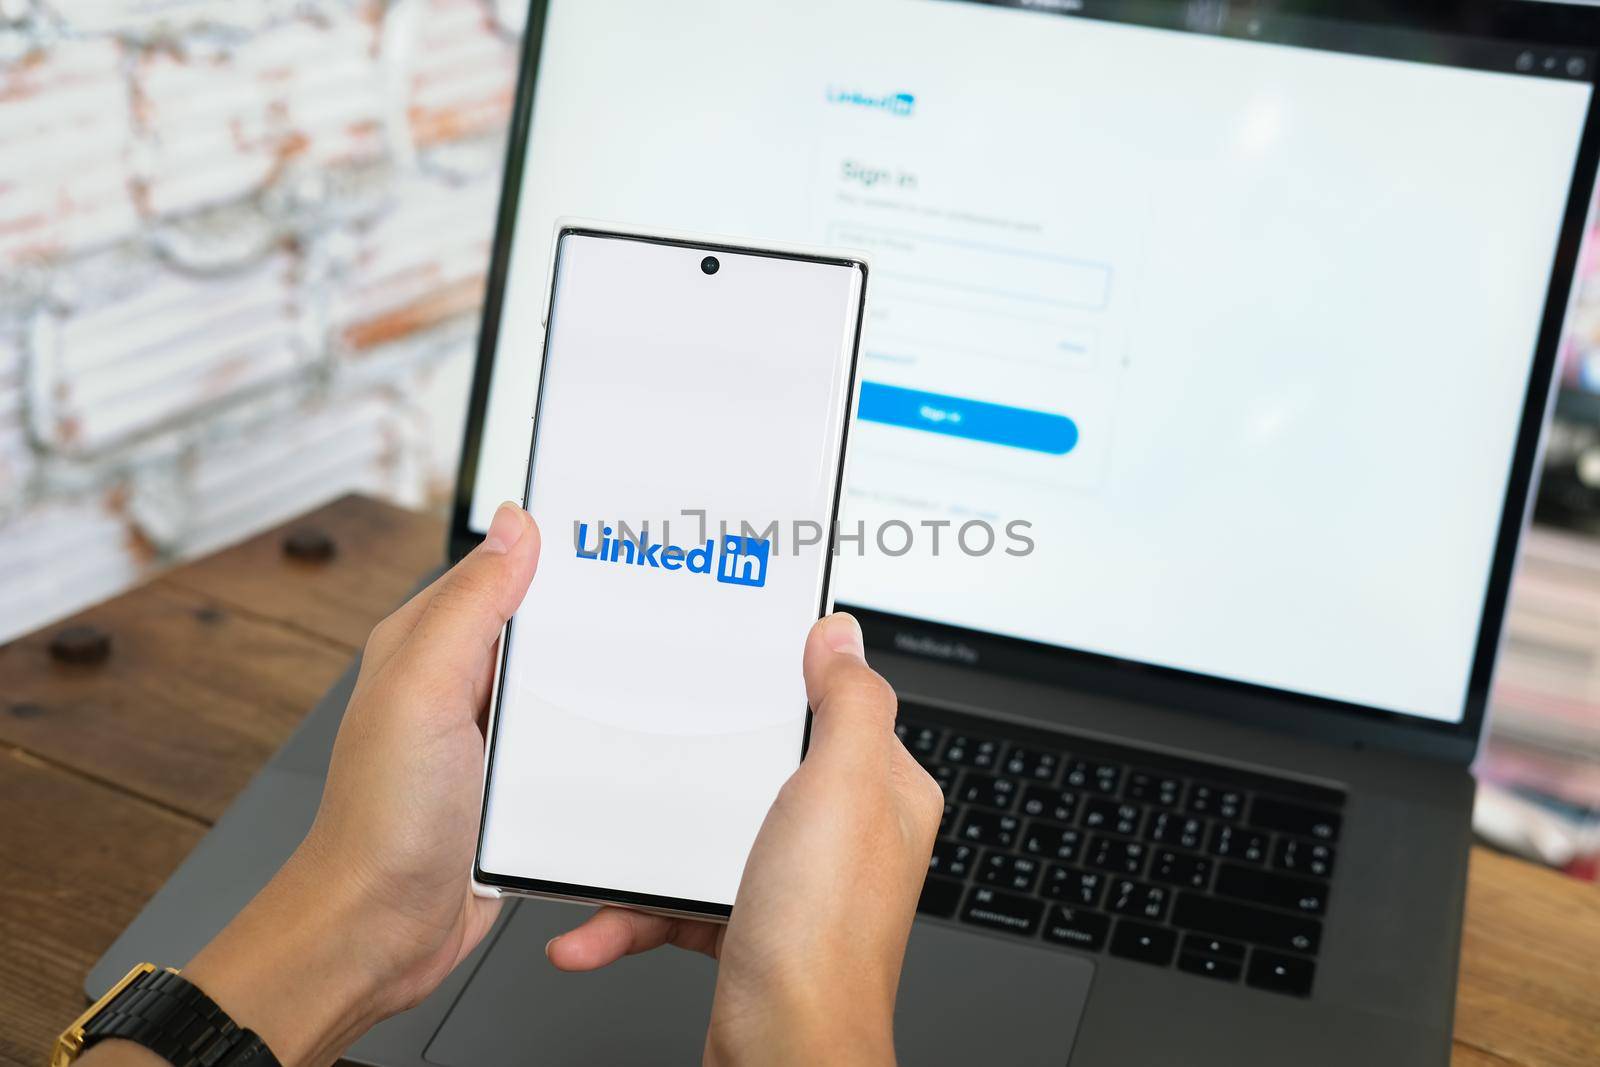 Chiangmai, THAILAND - June 06, 2021: LinkedIn human resource, business and employment-oriented service for job career search app on mobile smartphone by Manastrong